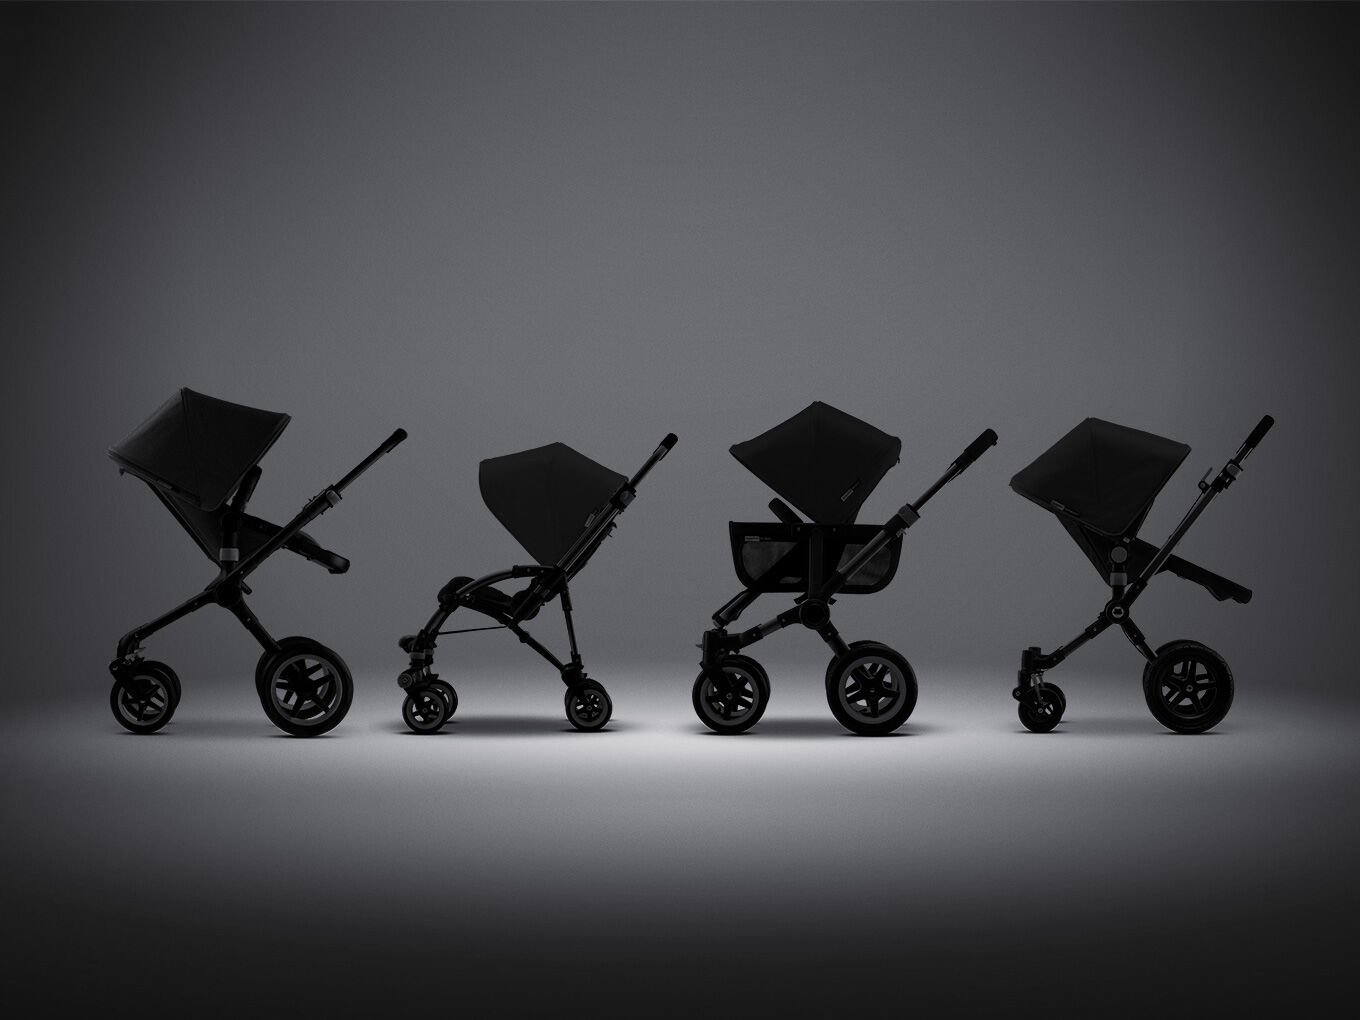 bugaboo cameleon 3 limited edition grey